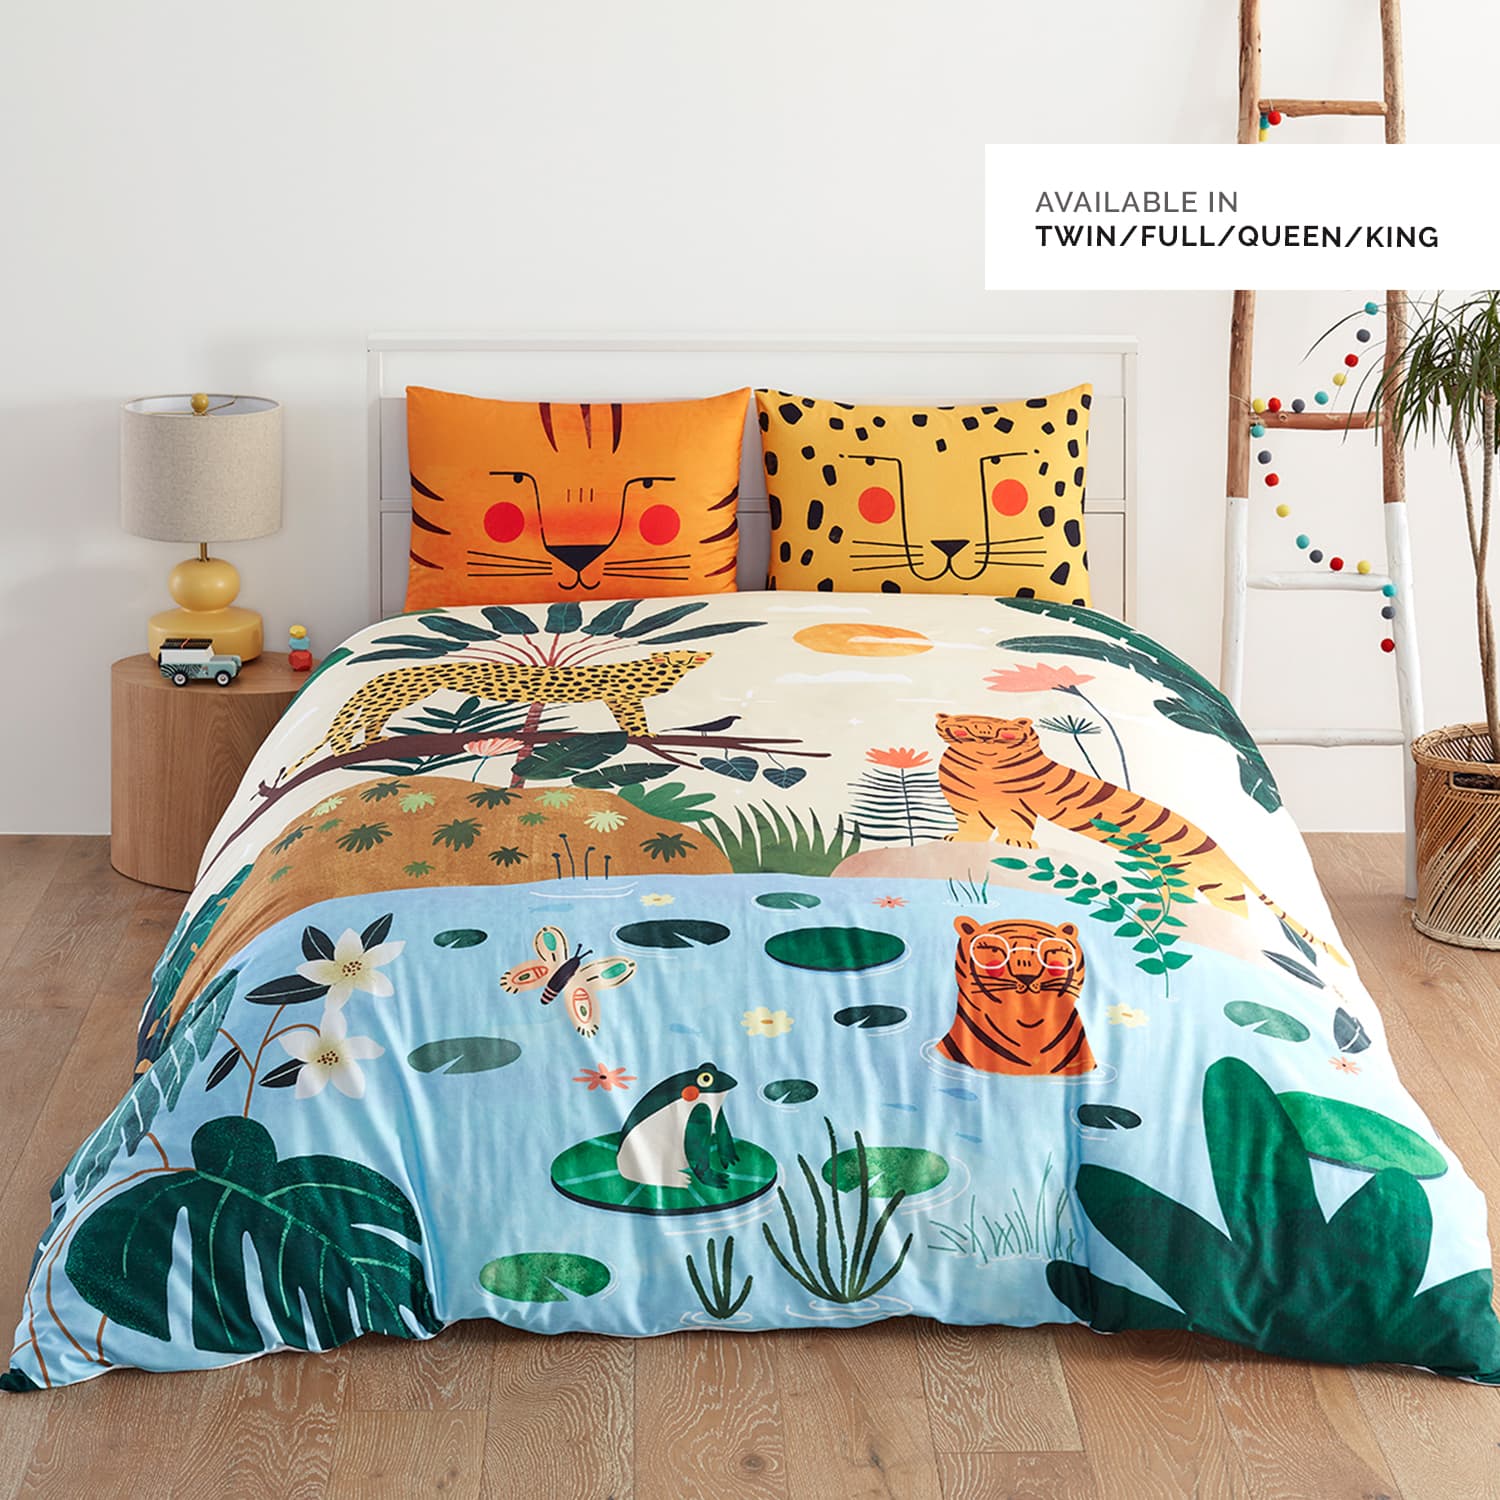 In The Jungle twin full queen king size bedding